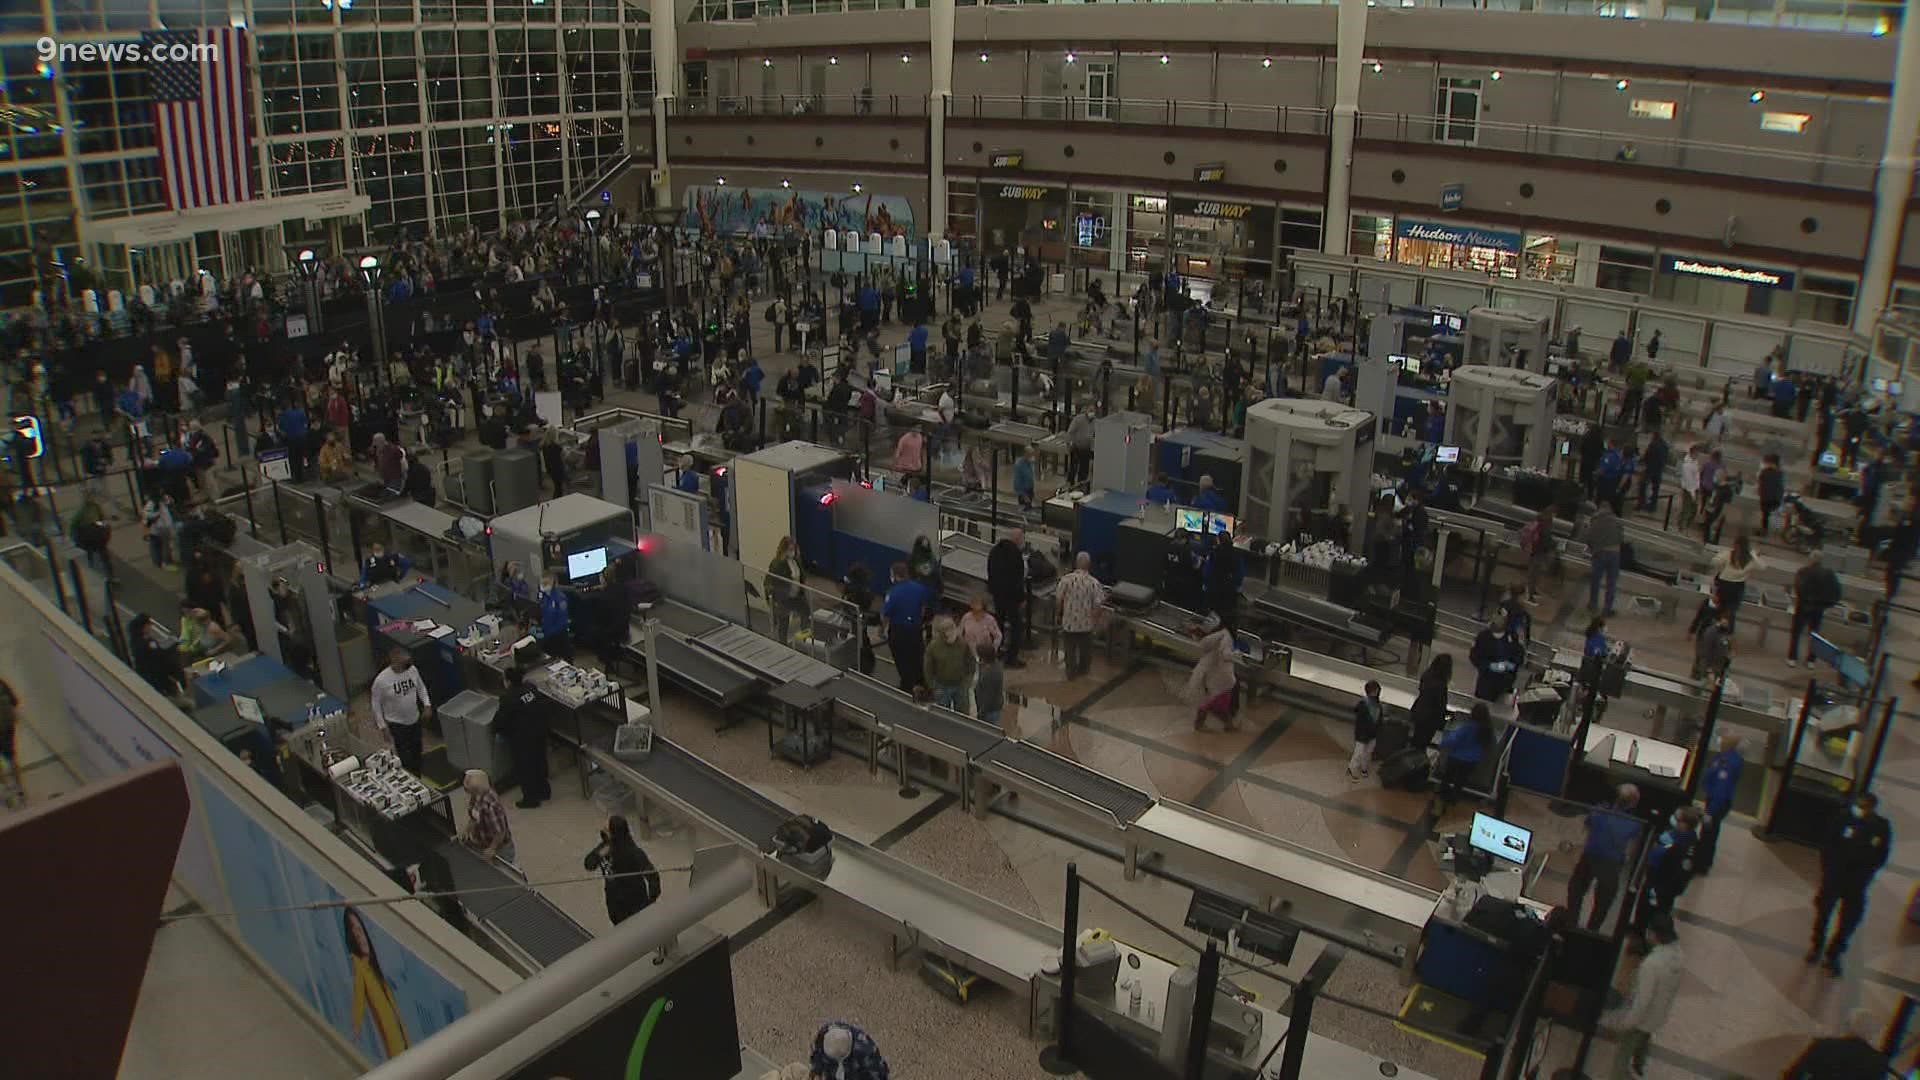 DIA is expecting to see more than 200,000 travelers during the Thanksgiving holiday. Eddie Randle shares what you need to know before heading to the airport.